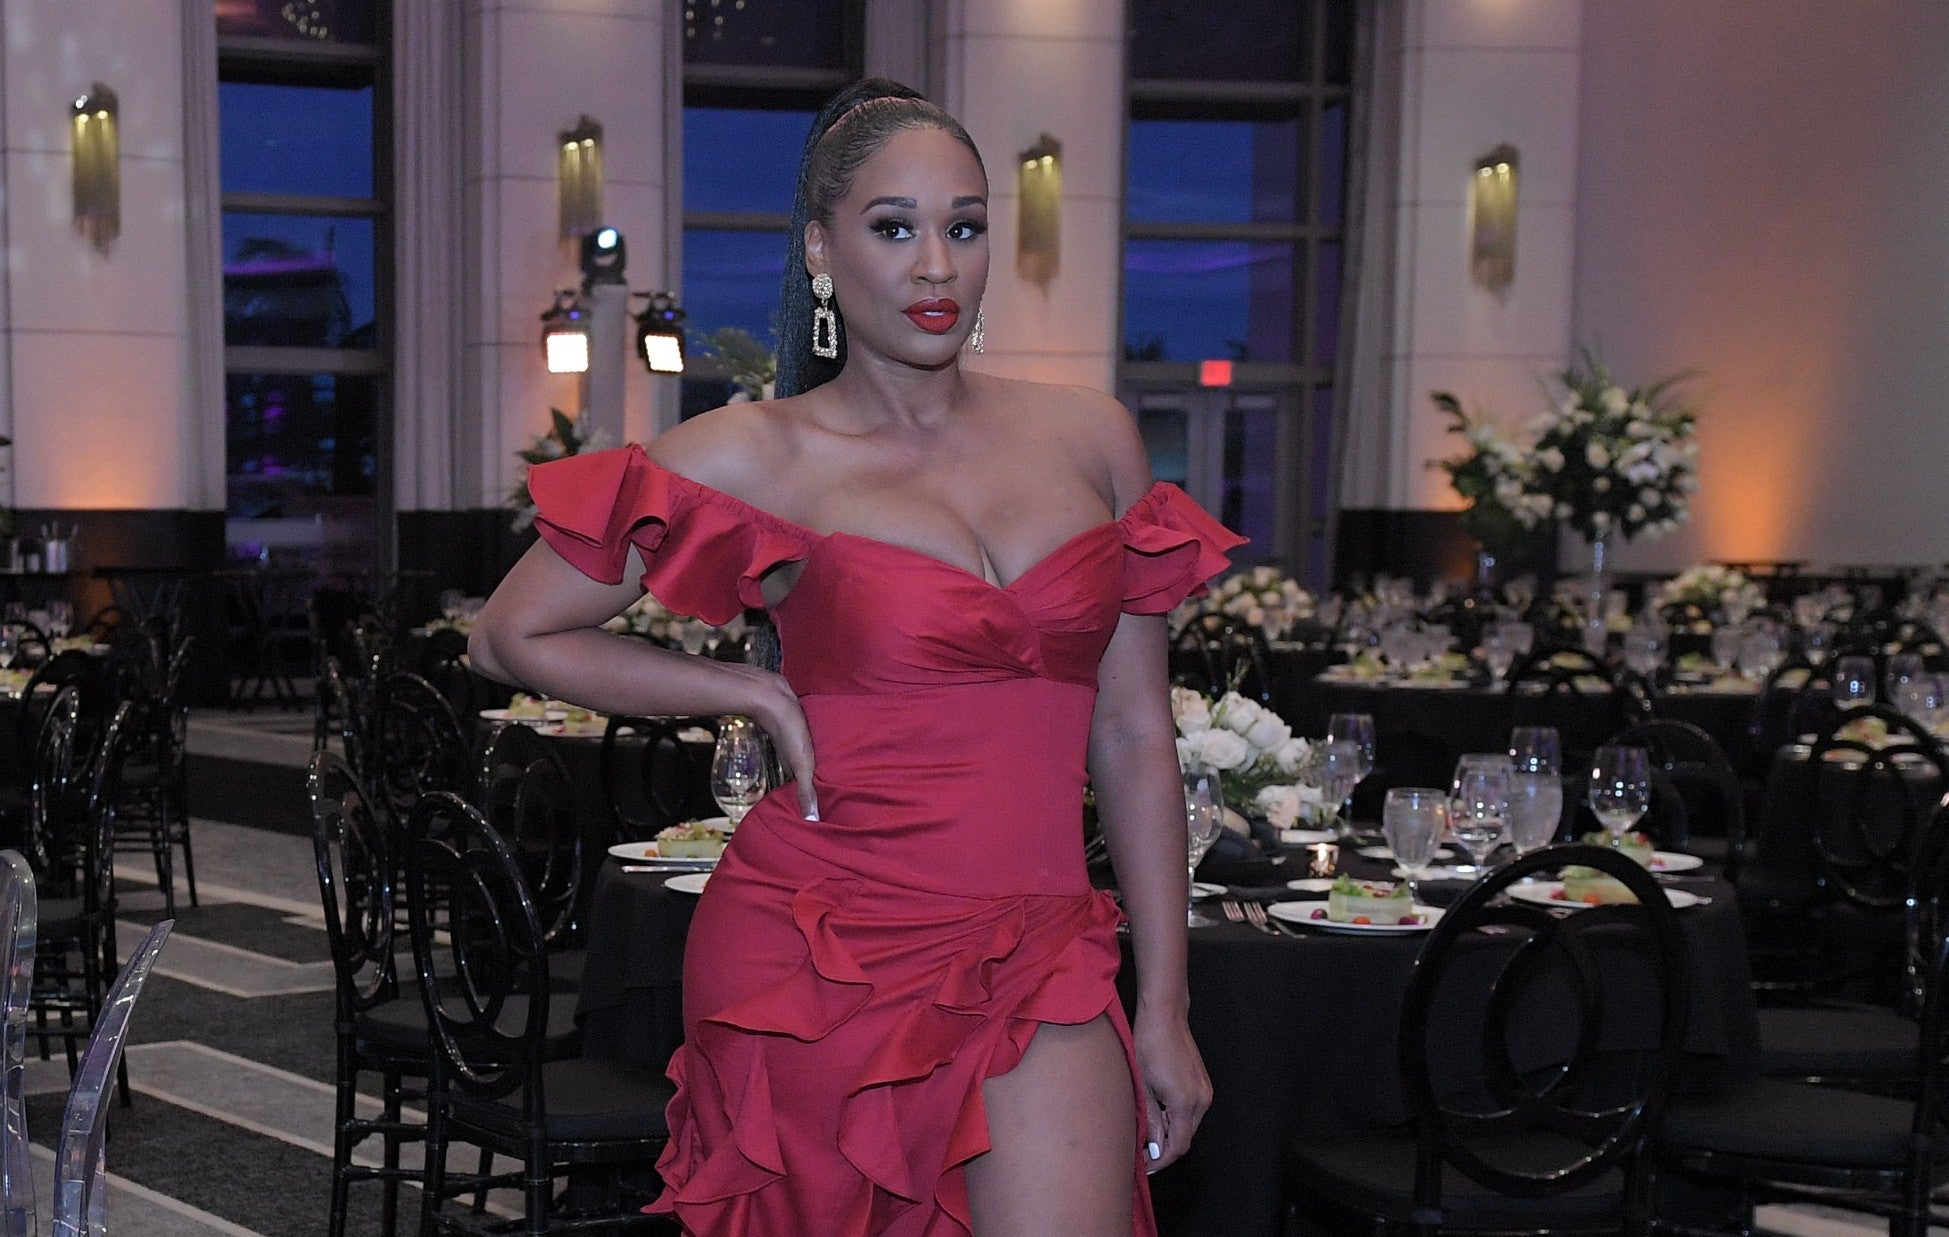 Beauty Moments From The Bawse Conference’s “Harlem Nights” Gala